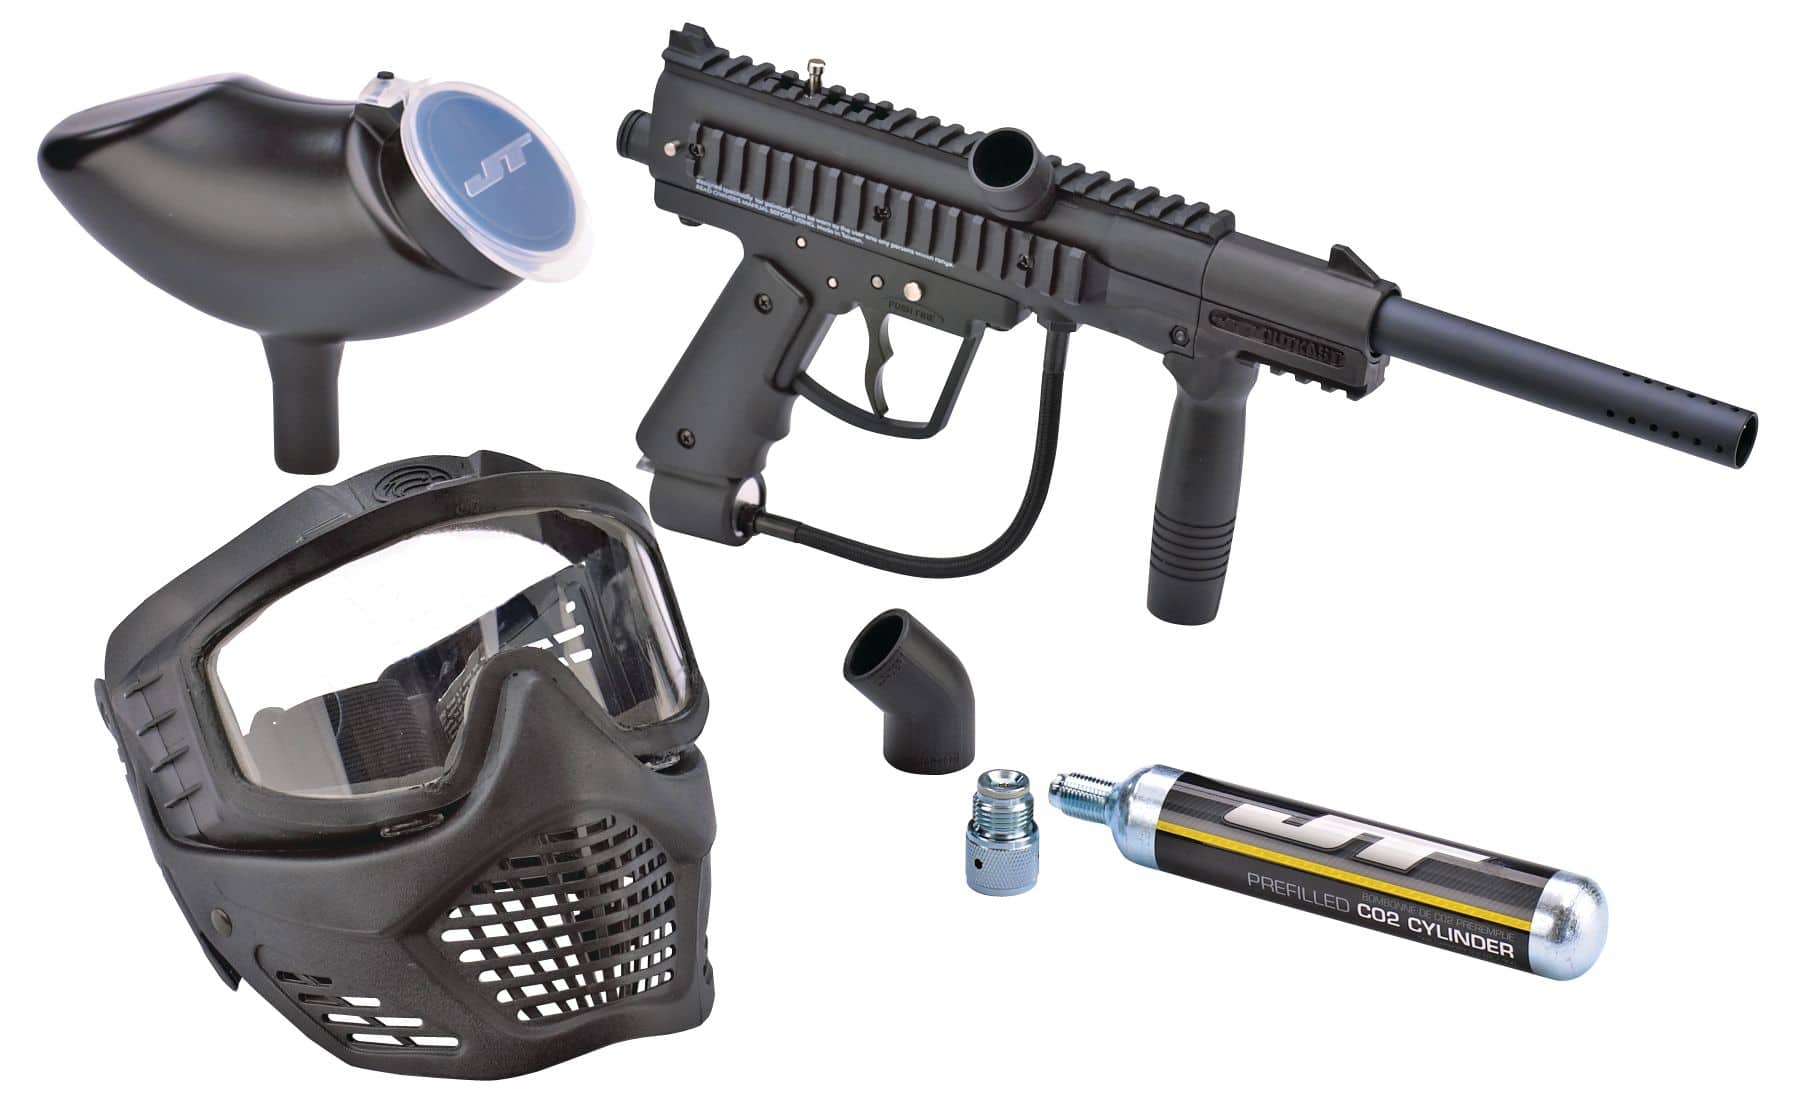 https://media-www.canadiantire.ca/product/playing/hunting/target-sports/0757108/paintball-marker-jt-outkast-00c01f19-eb1a-41be-b036-0de4a646d8f1-jpgrendition.jpg